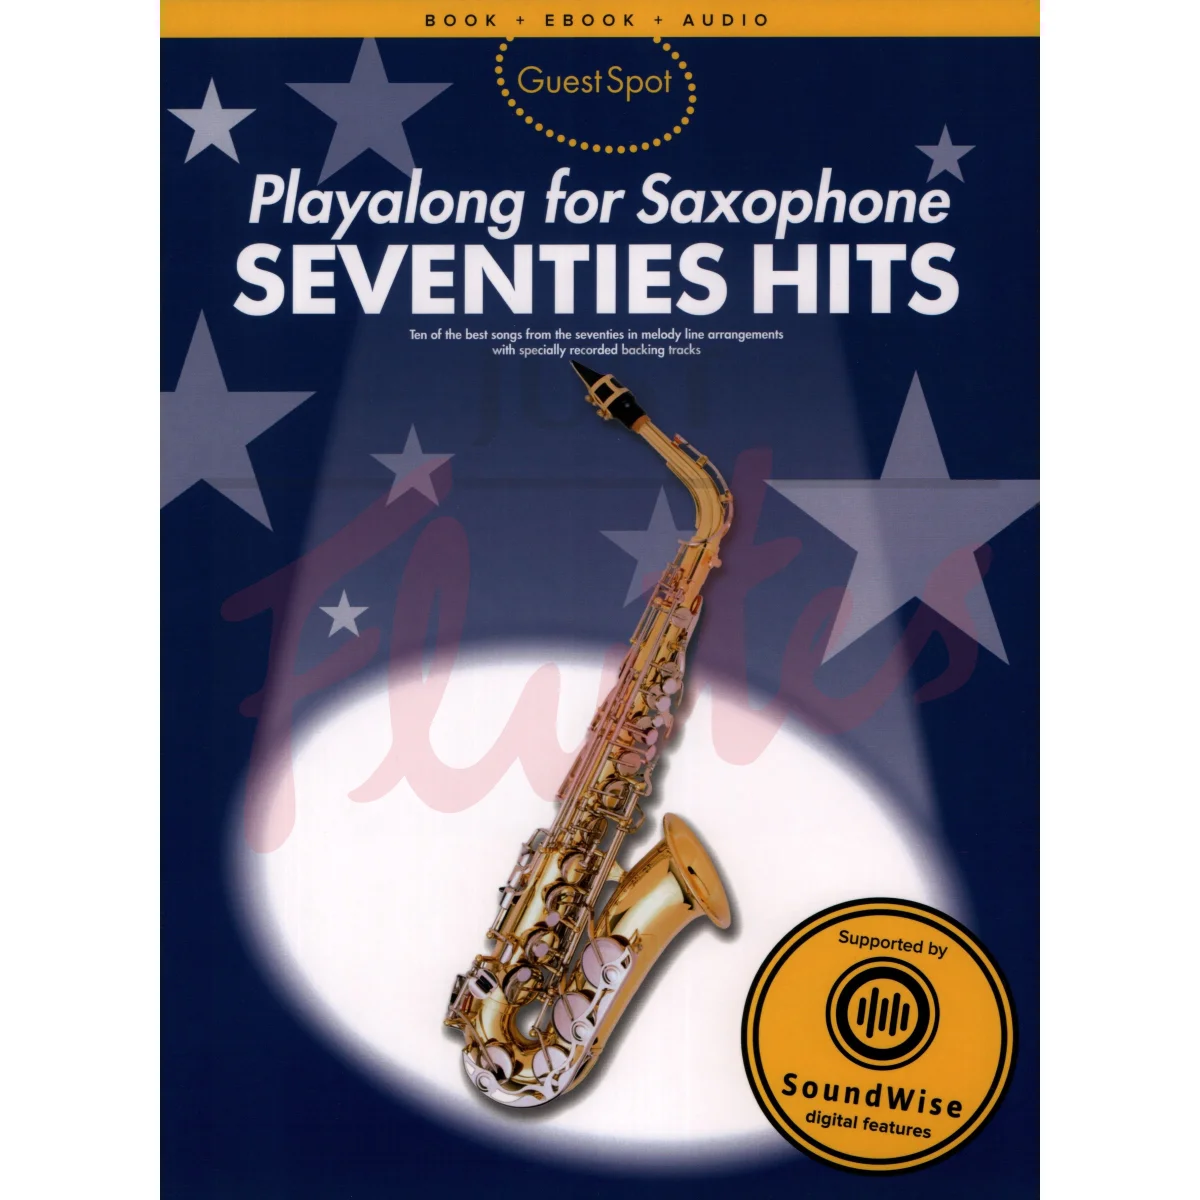 Seventies Hits - Playalong for Saxophone